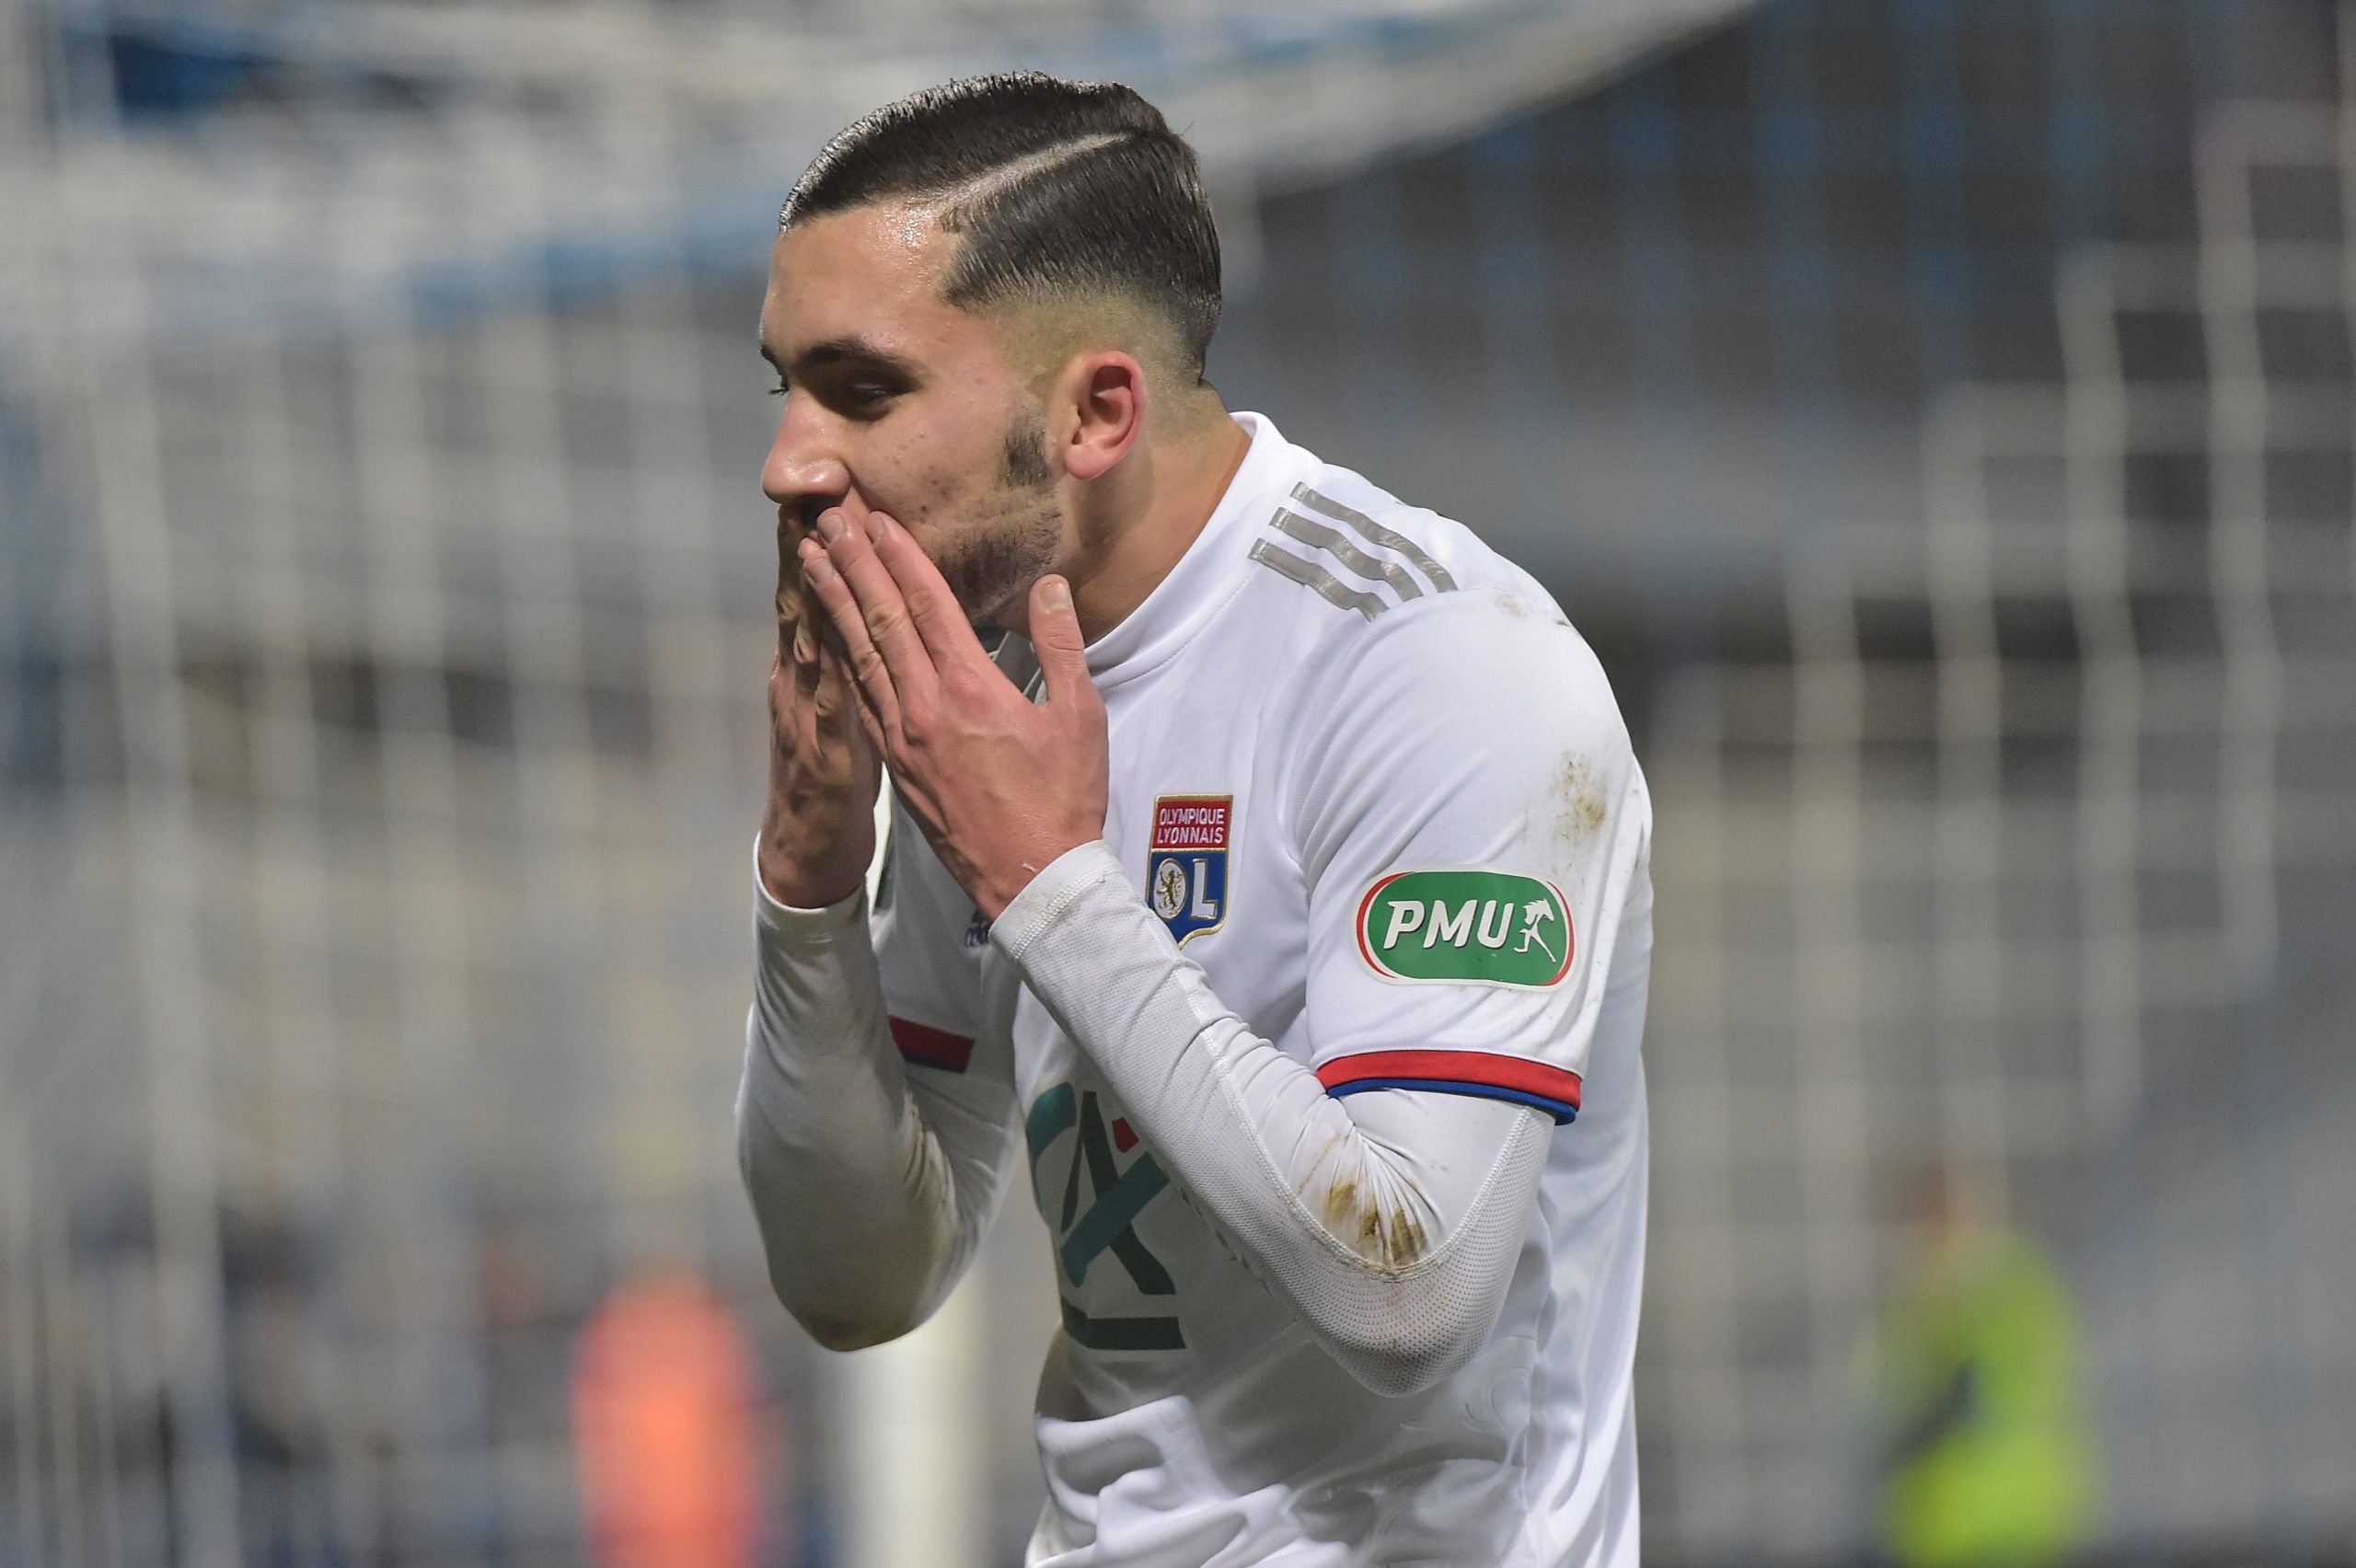 Lyons French forward Rayan Cherki celebrates after scoring a goal during the French Cup round of 64 football match between Bourg-en-Bresse (FBBP) and Lyon (OL) on January 4, 2020 at the Stade Marcel-Verchere Stadium in Bourg-en-Bresse. (Getty Images)